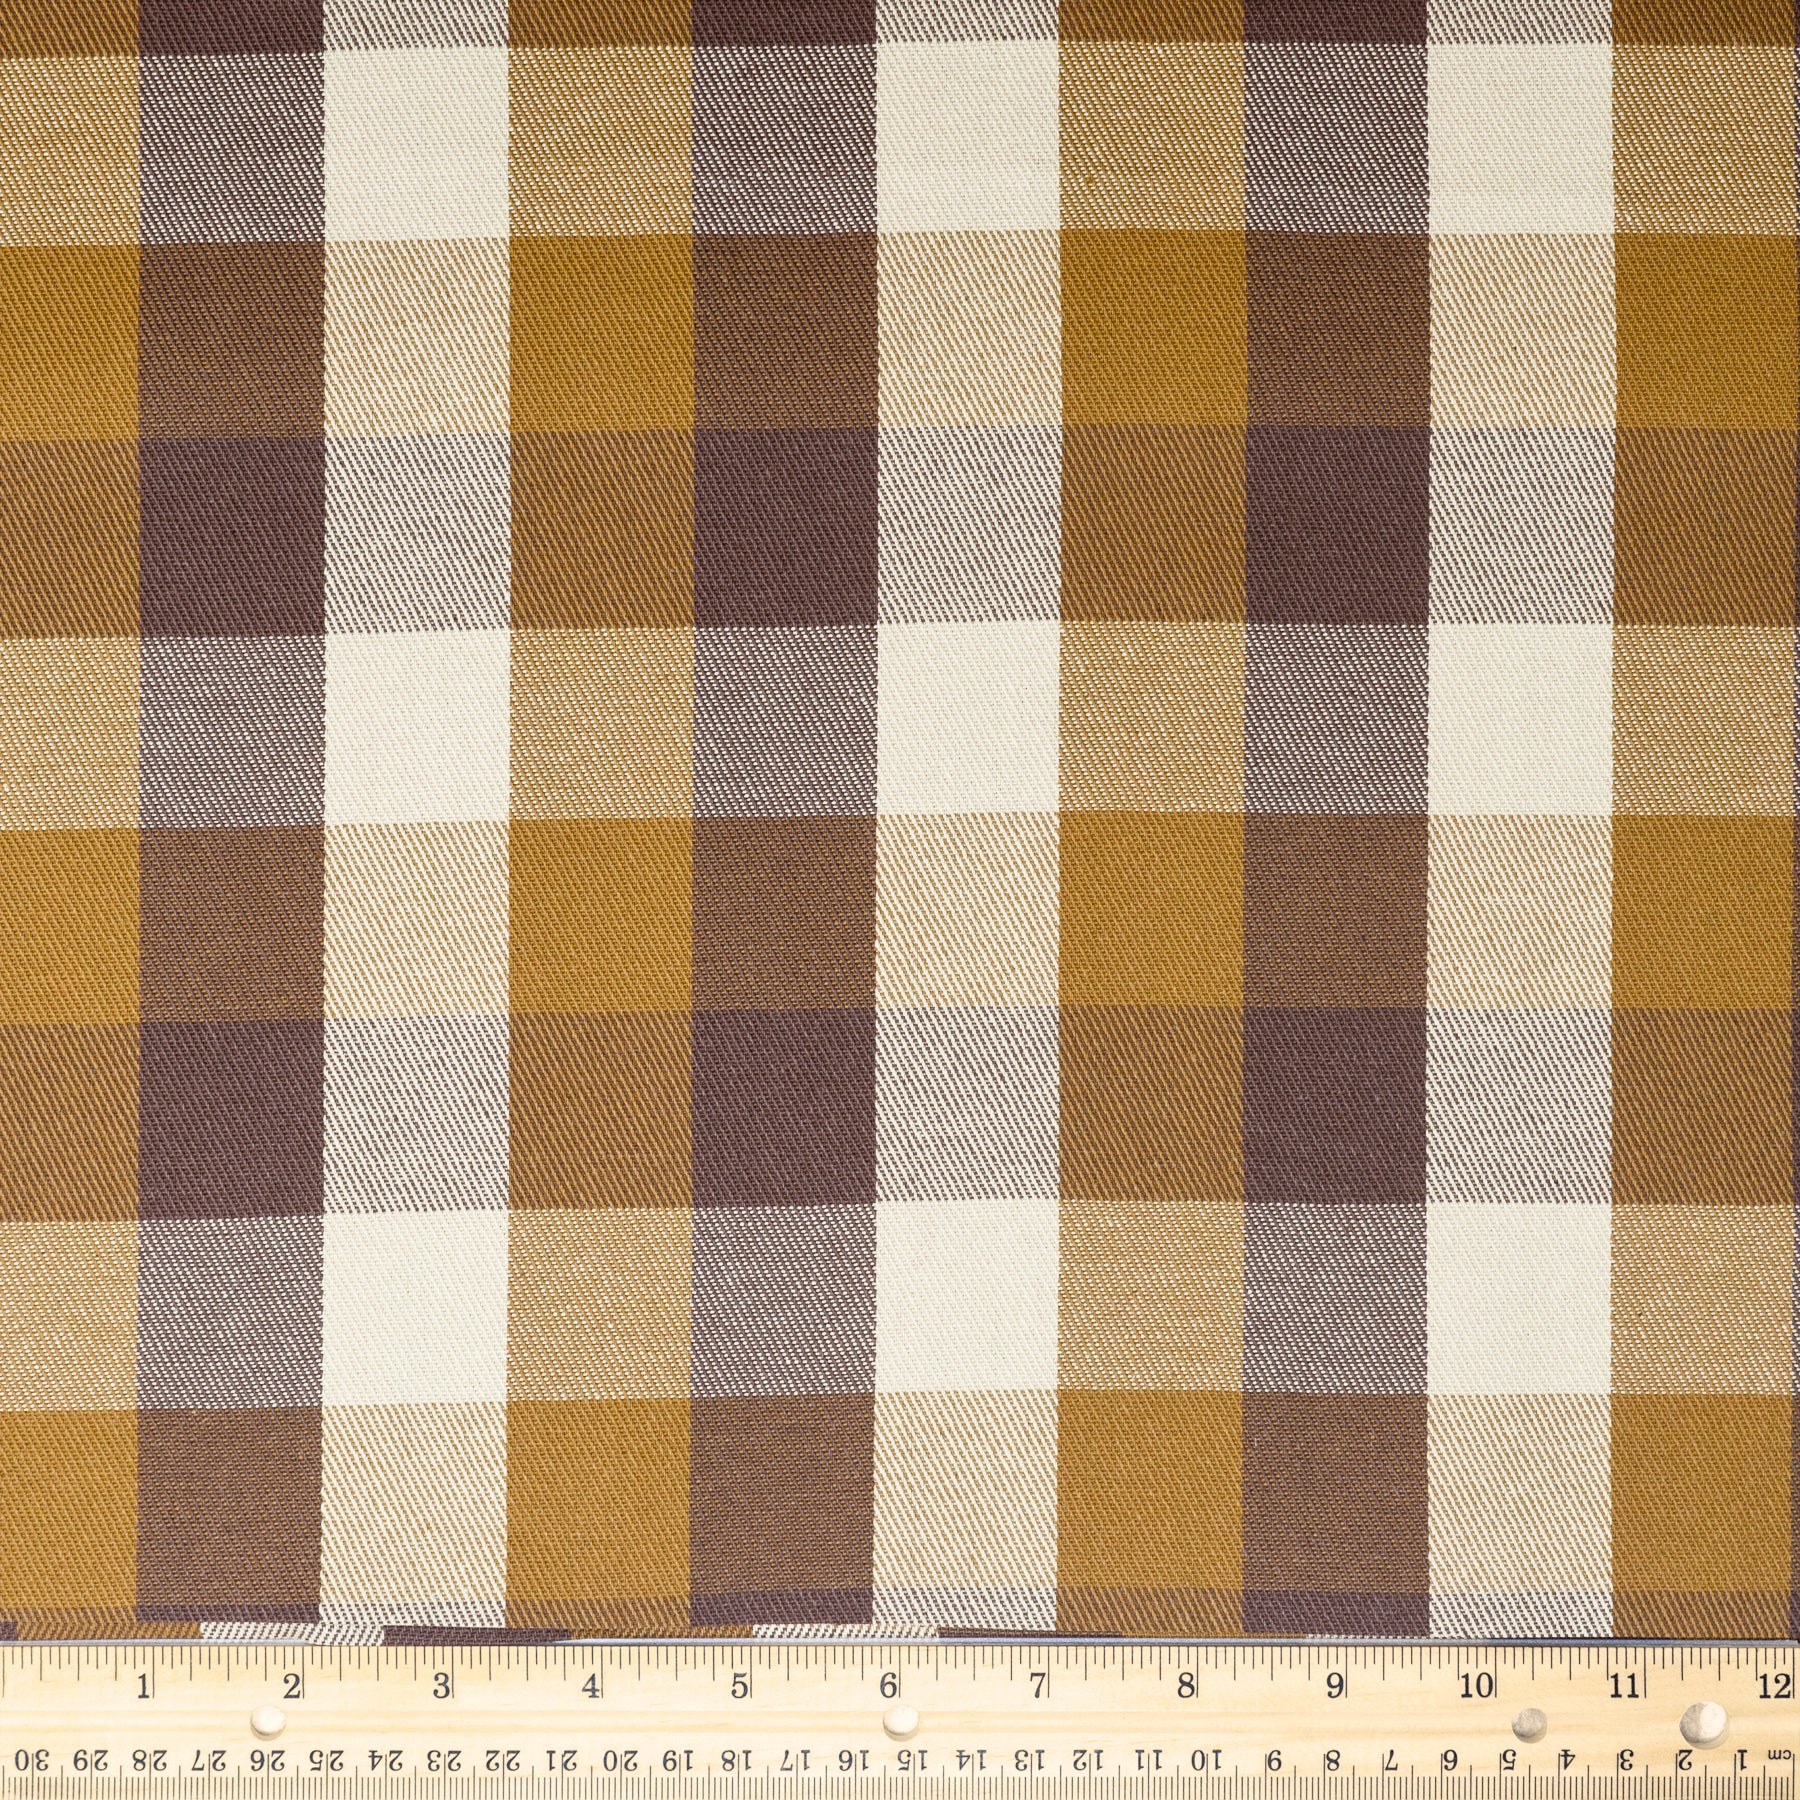 Waverly Inspirations 100% Cotton Duck 54" Twill Plaid Brown Color Sewing Fabric by the Yard